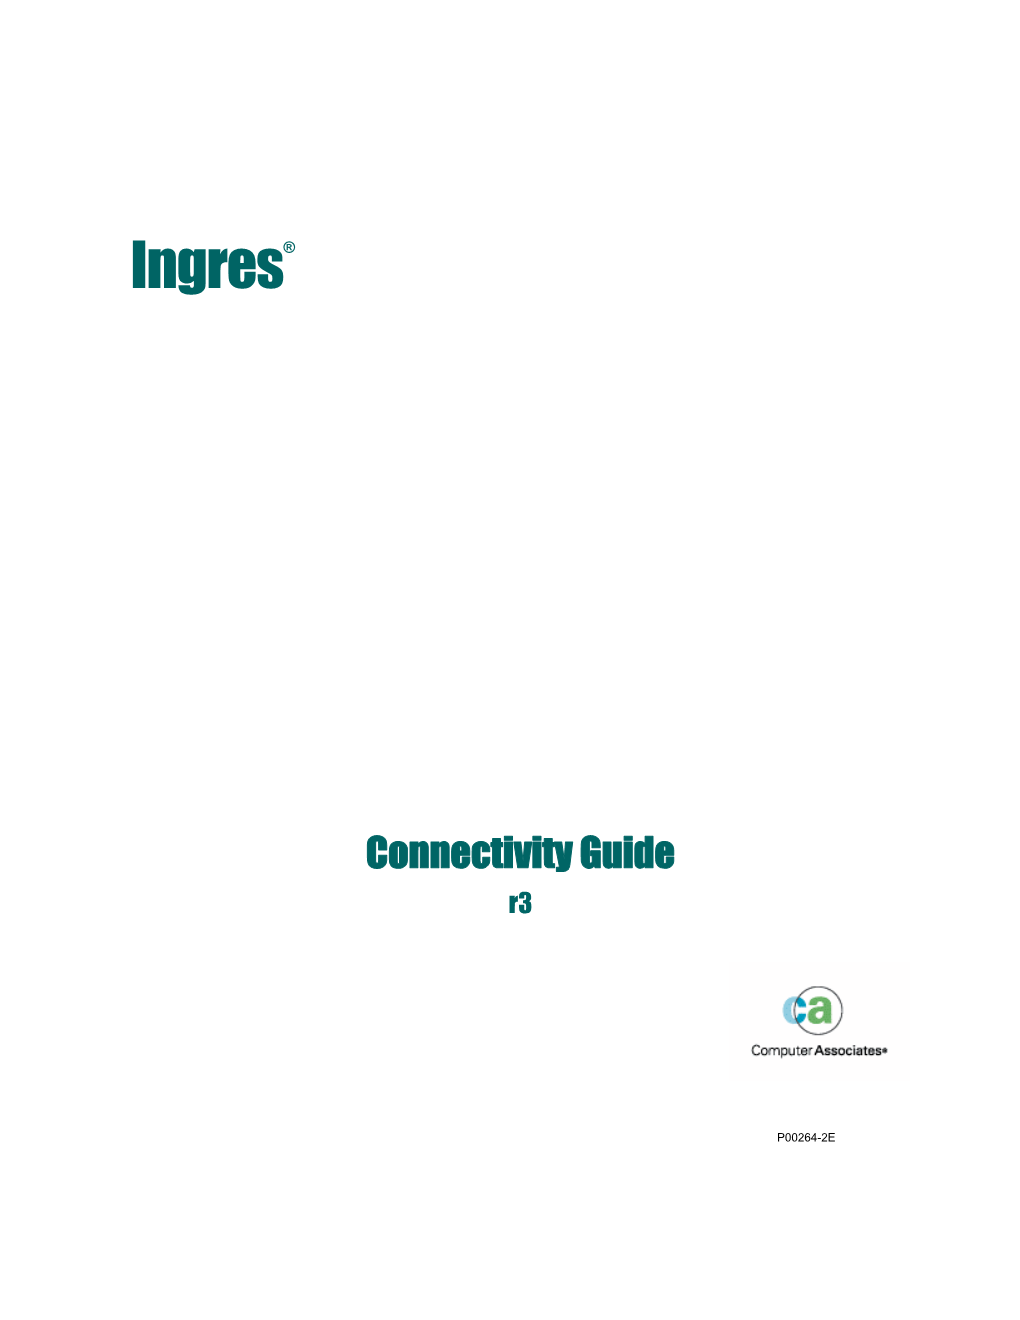 Ingres R3 Connectivity Guide